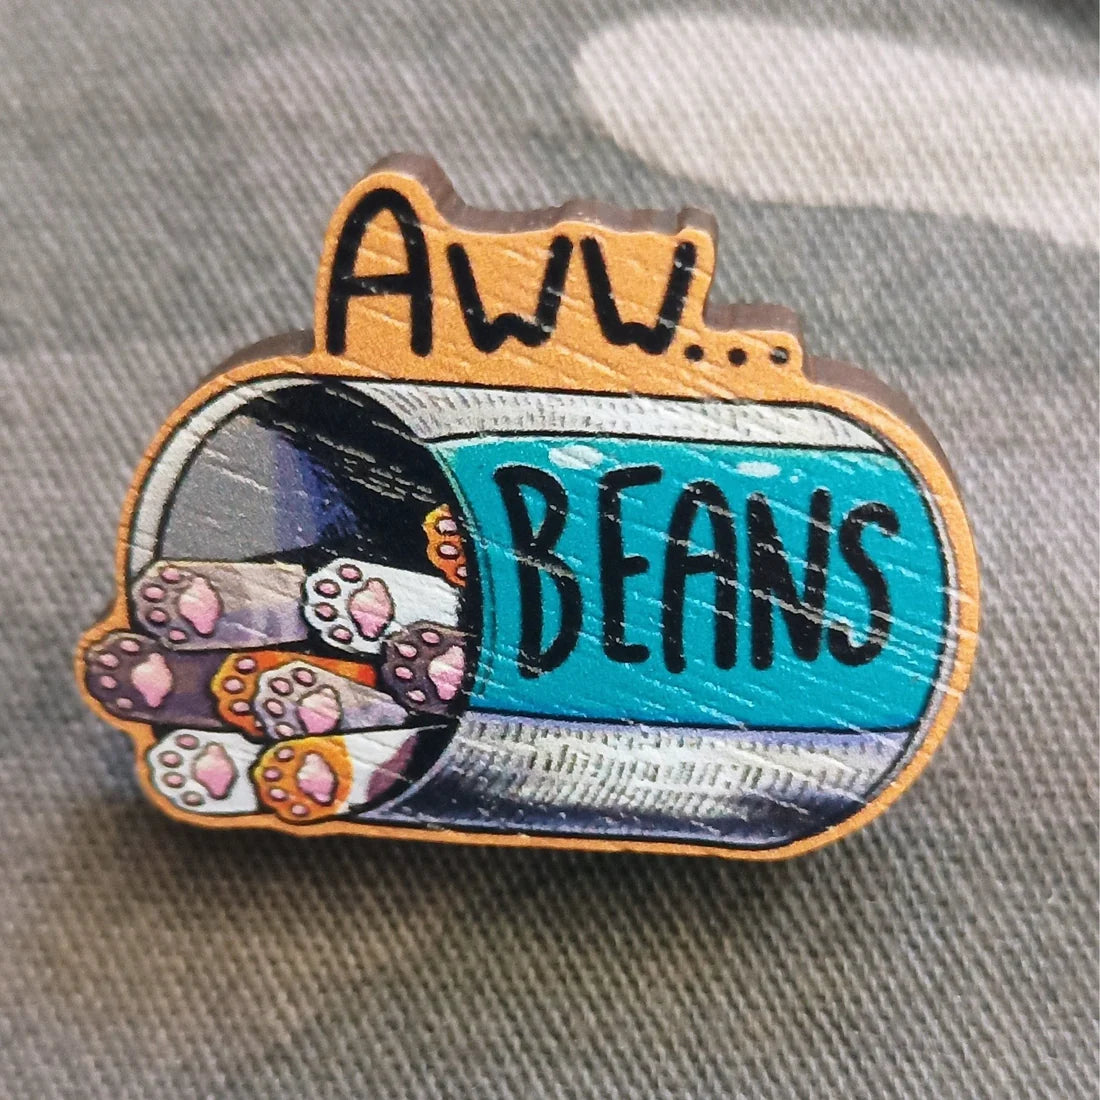 5 Benefits of Shopping Wooden Pins Over Enamel or Acrylic Pins